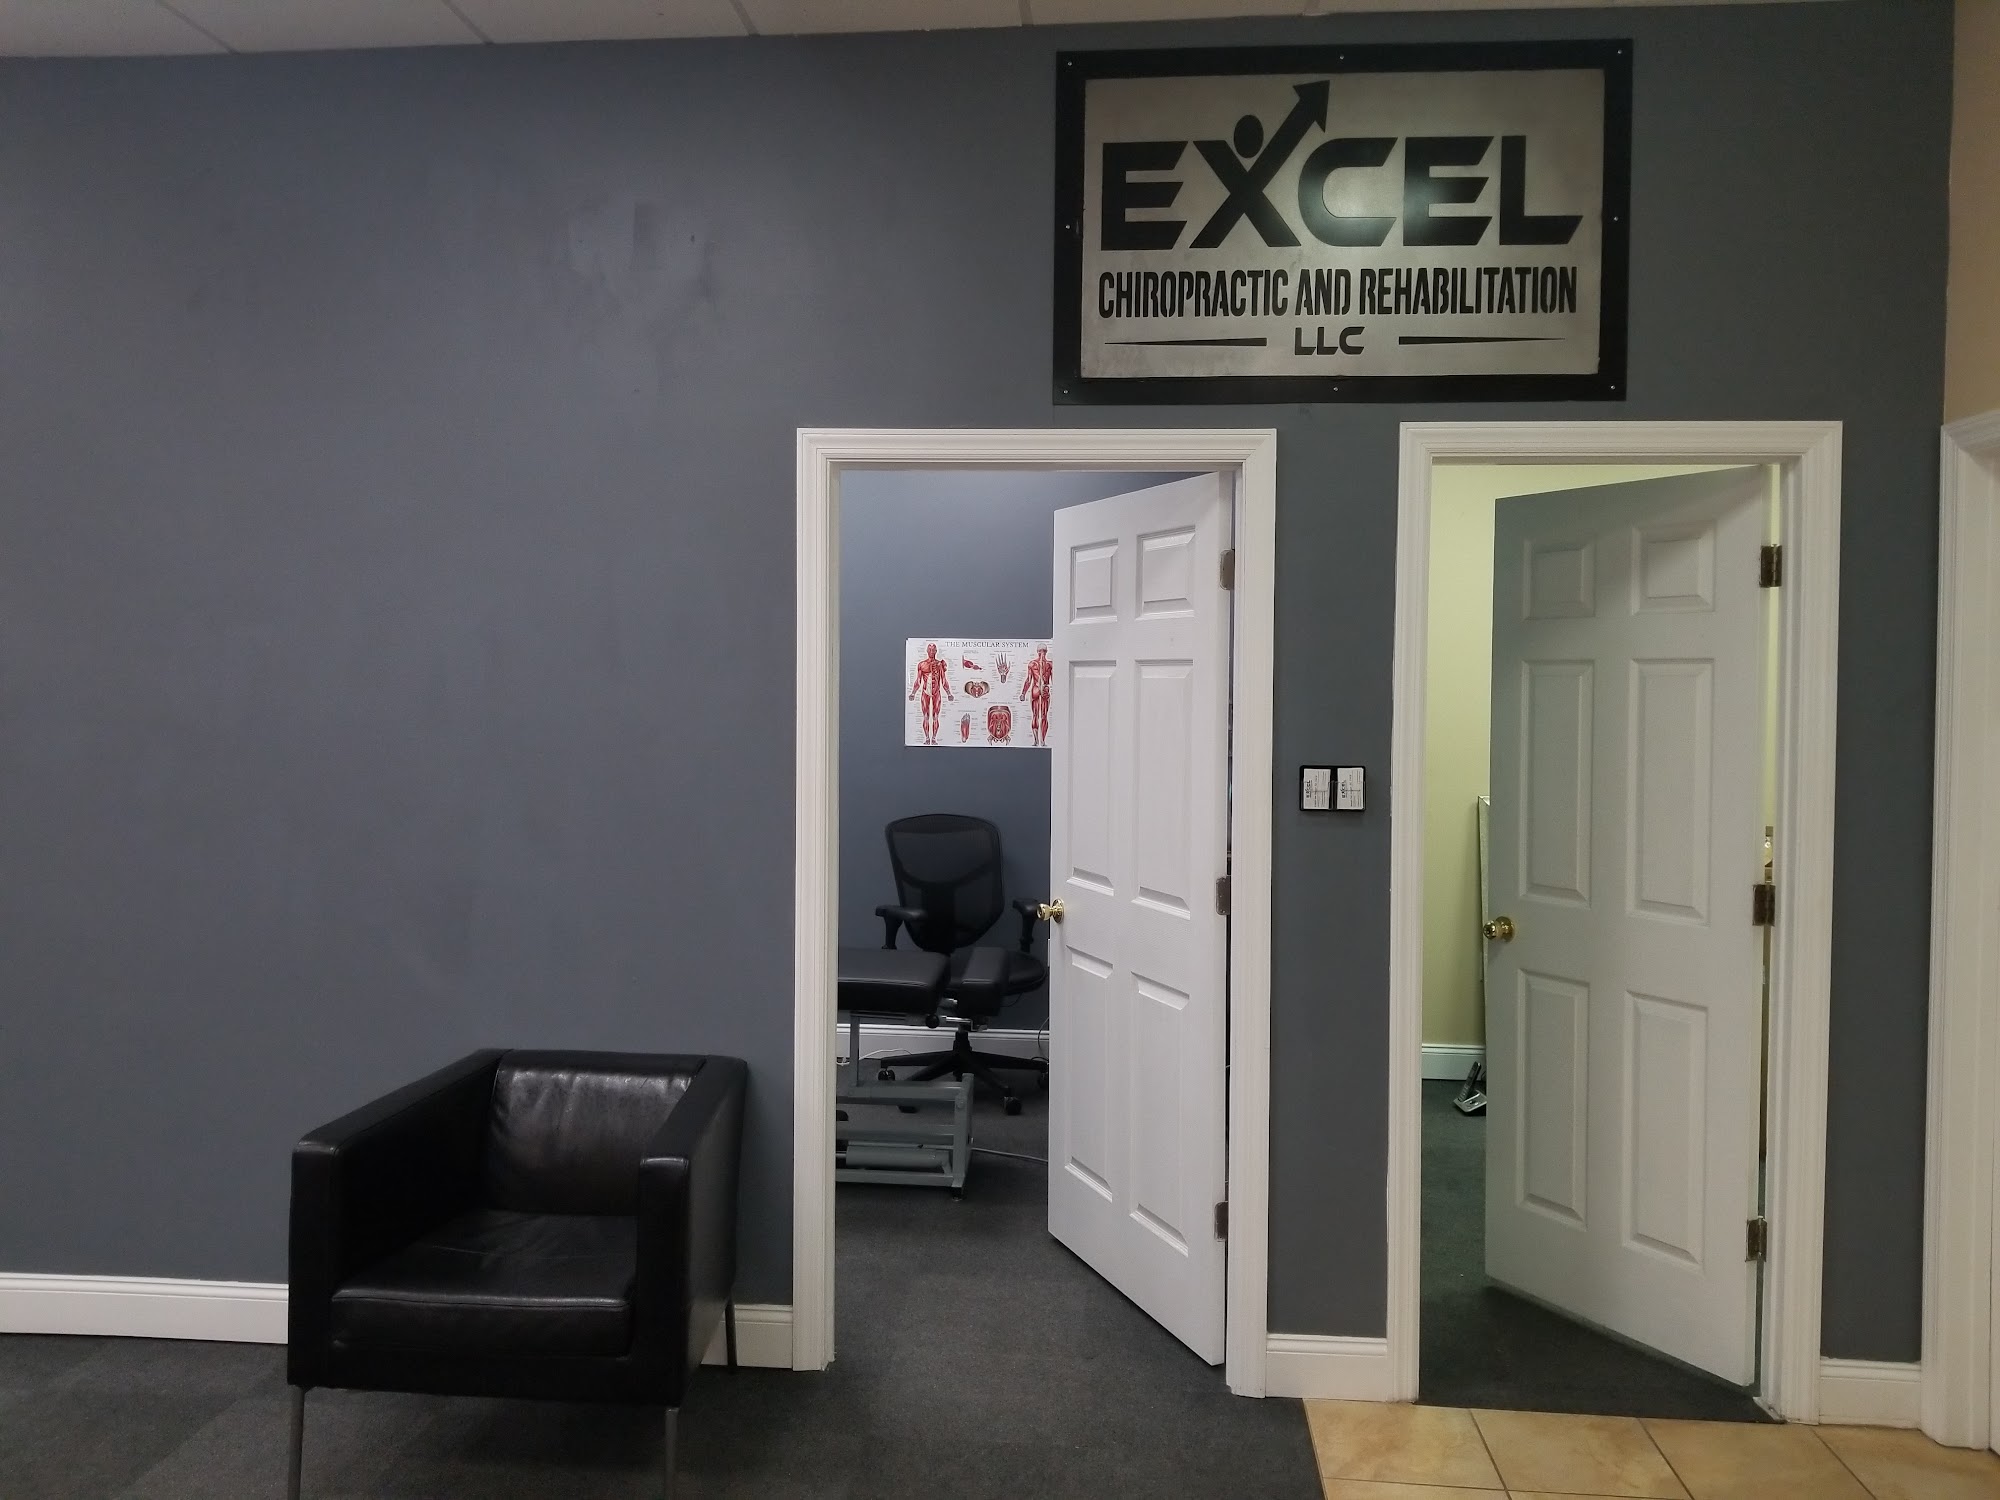 Excel Chiropractic and Rehabilitation